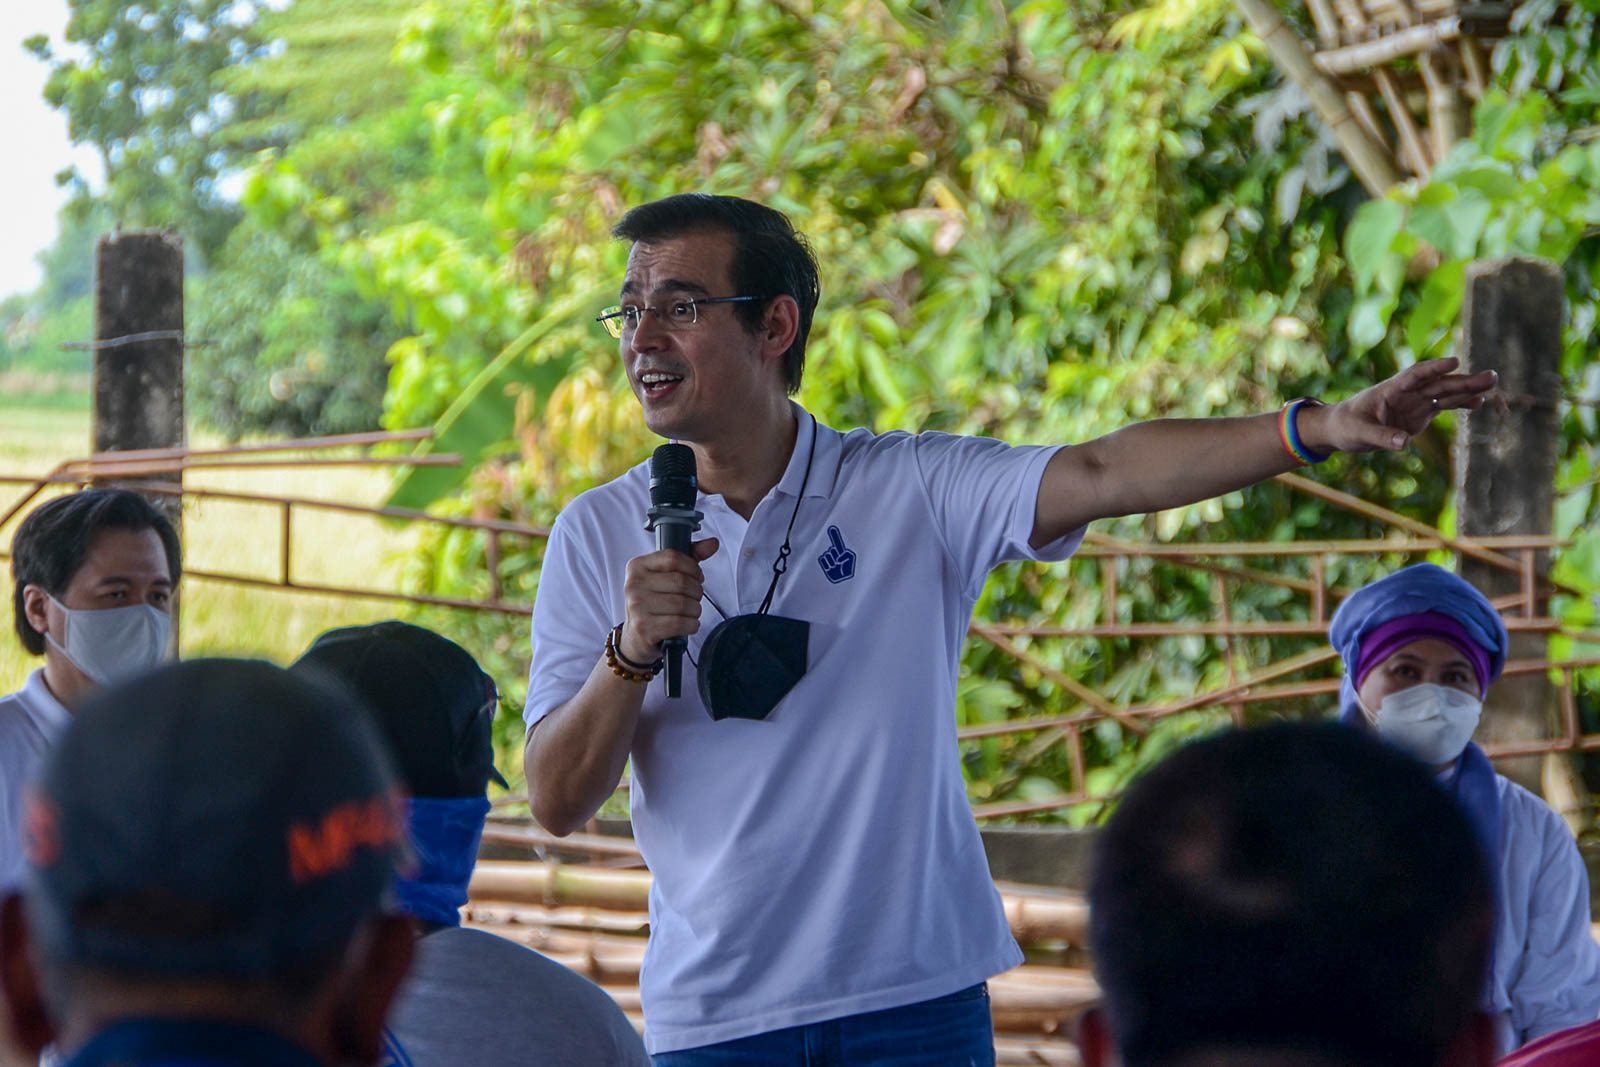 Isko Moreno aims for ‘normalcy’ amid pandemic by December 2022 if elected president